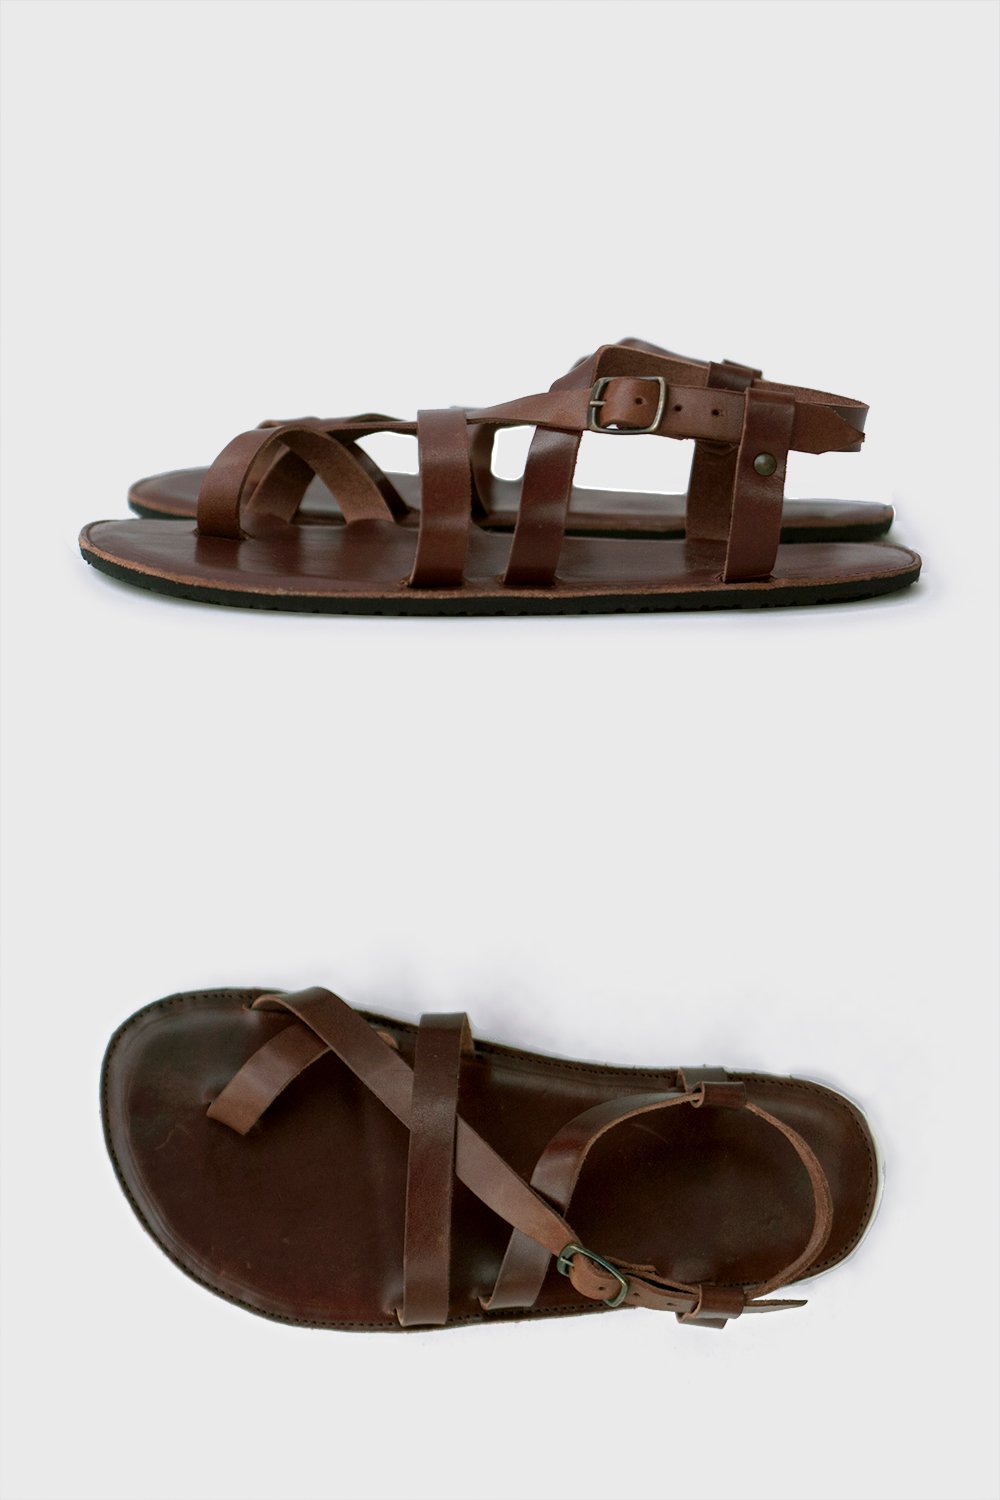 Aventuras - Adjustable Sandals in Brown | The Drifter Leather handmade ...